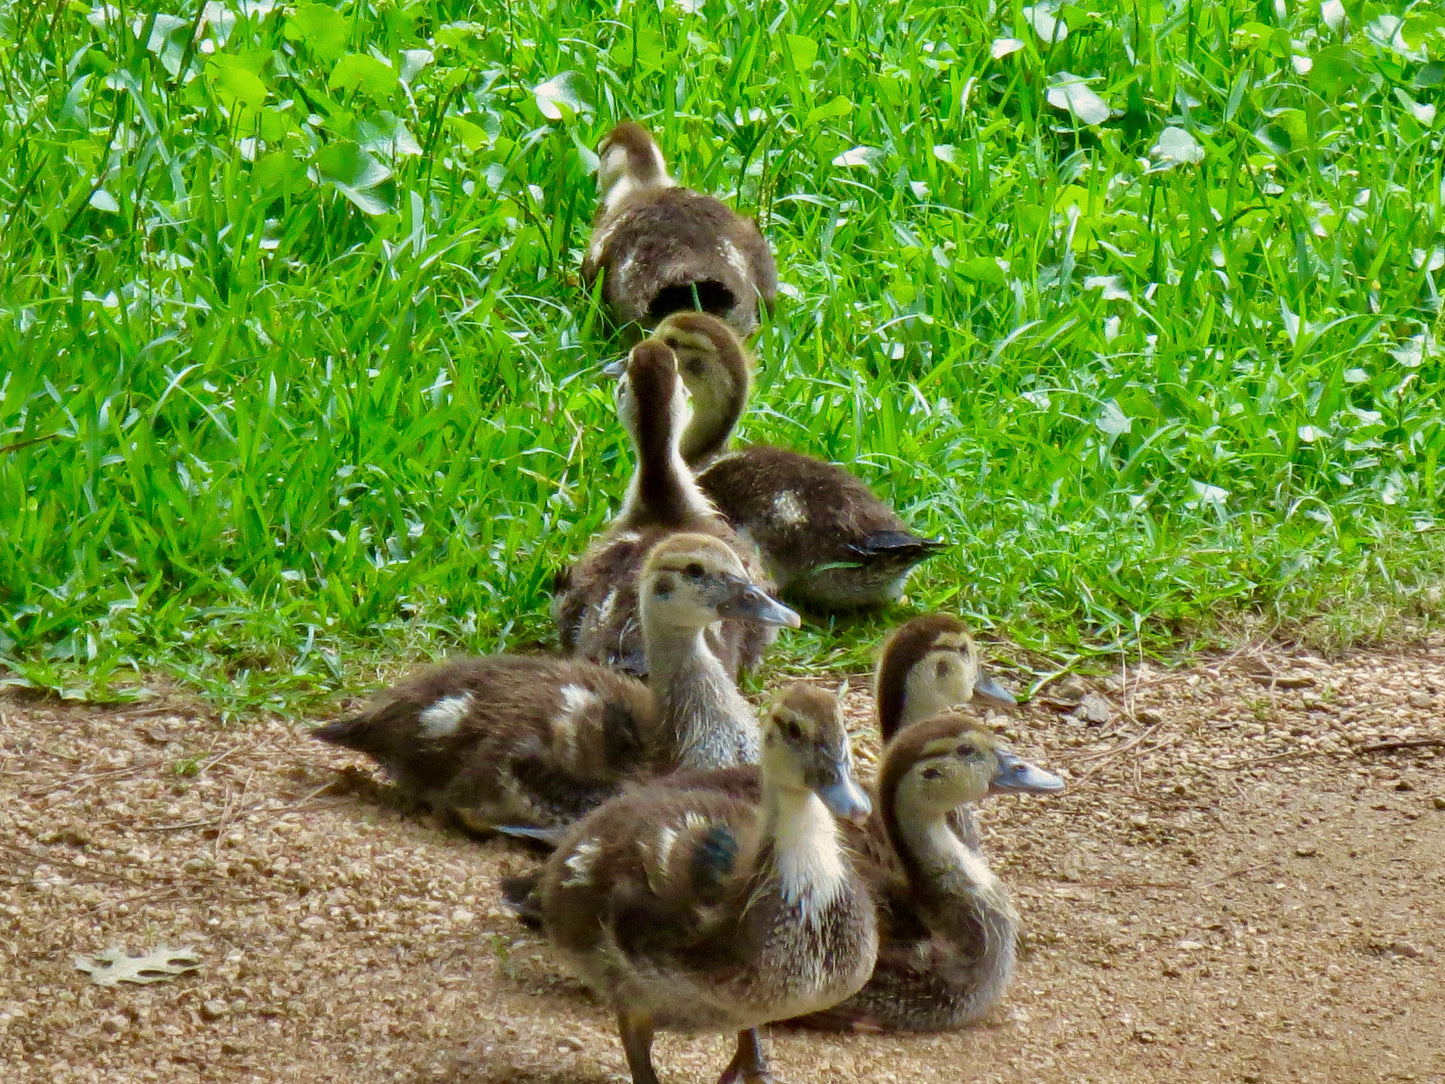 This is a photo of 7 baby ducklings walking through the grass